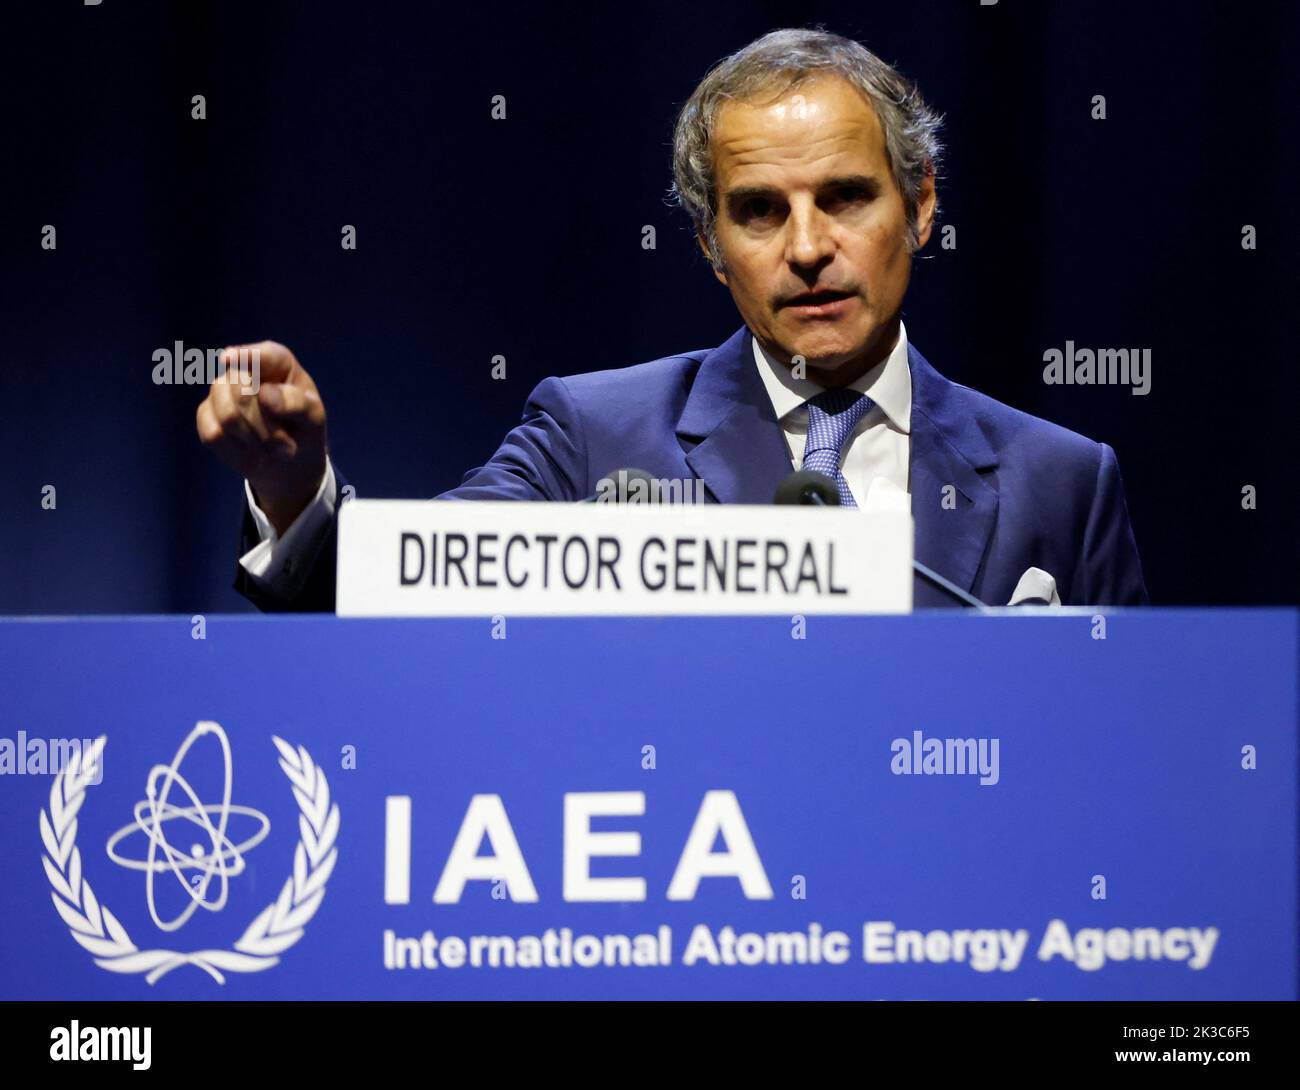 International Atomic Energy Agency Director General Rafael Grossi attends the opening of the IAEA General Conference at their headquarters in Vienna, Austria, September 26, 2022. REUTERS/Leonhard Foeger Stock Photo